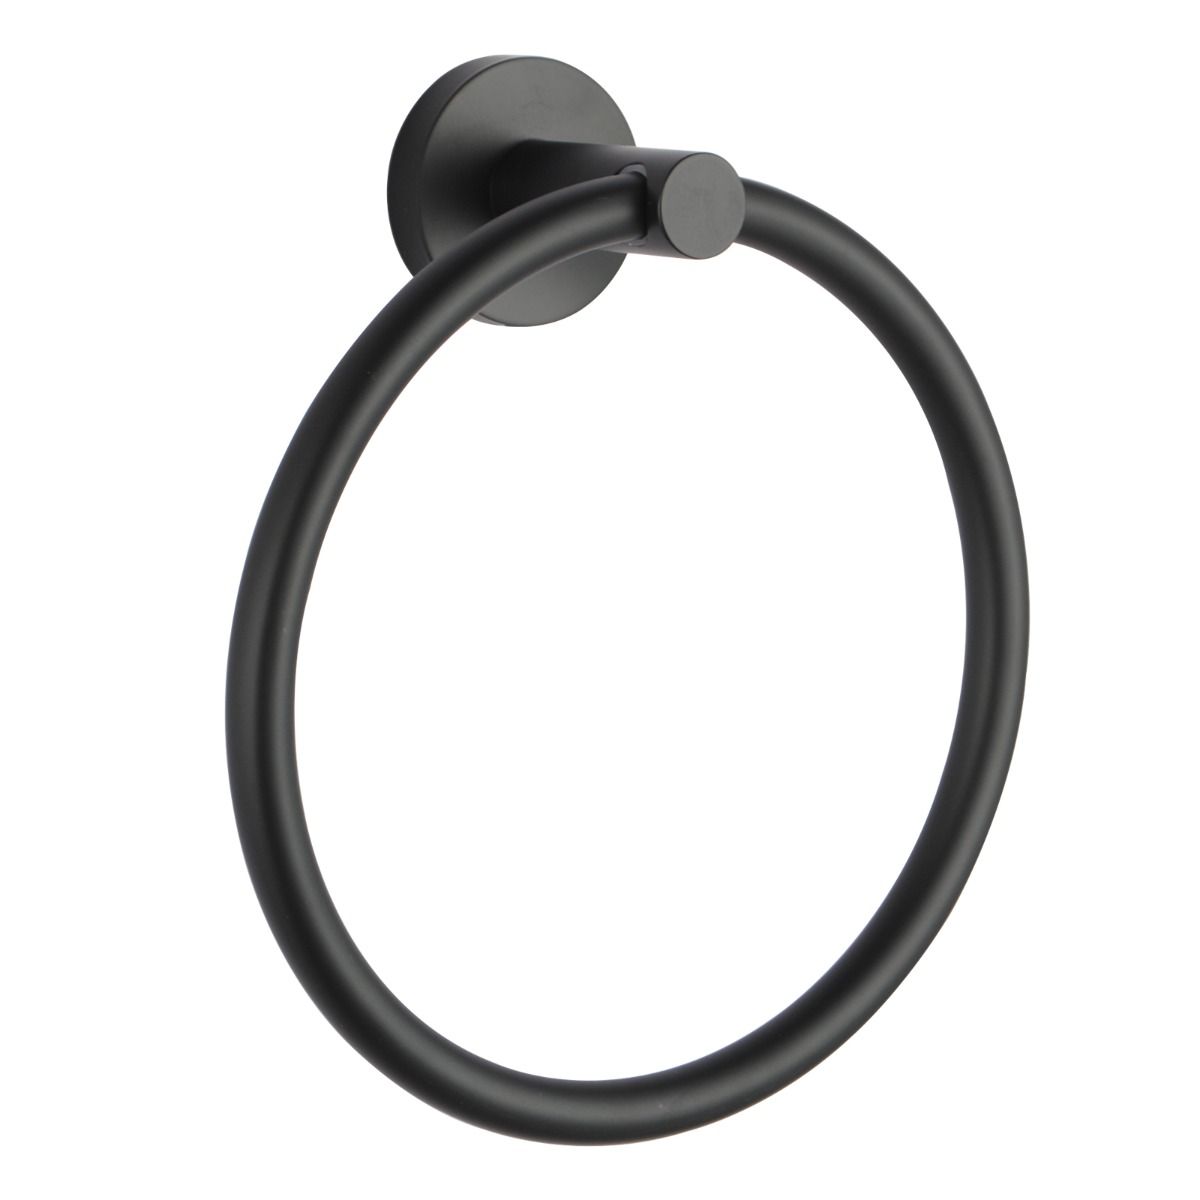 Pentro Matte Black Wall Mounted Round Hand Towel Ring